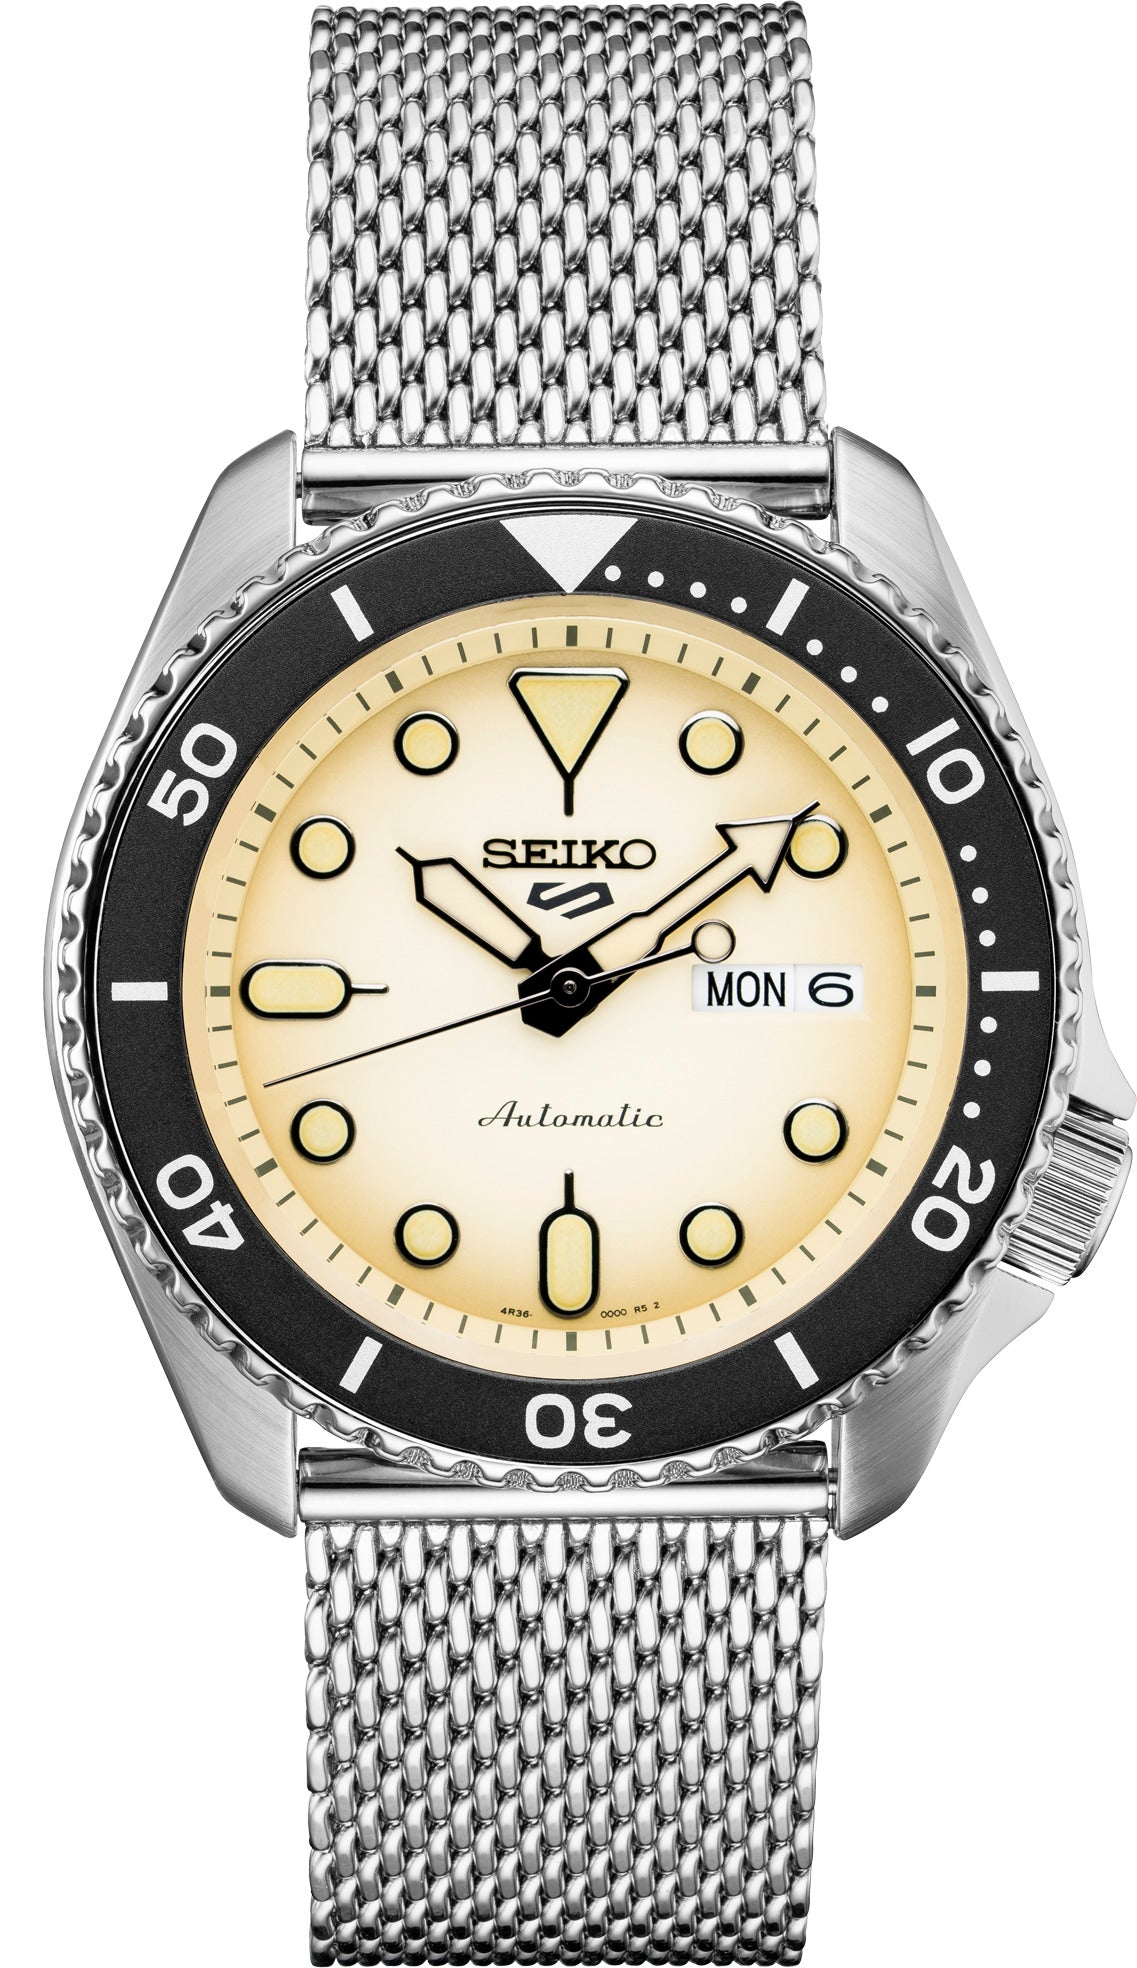 Seiko 5 Sports Men's Stainless Watch in color Silver, Off white from the front view